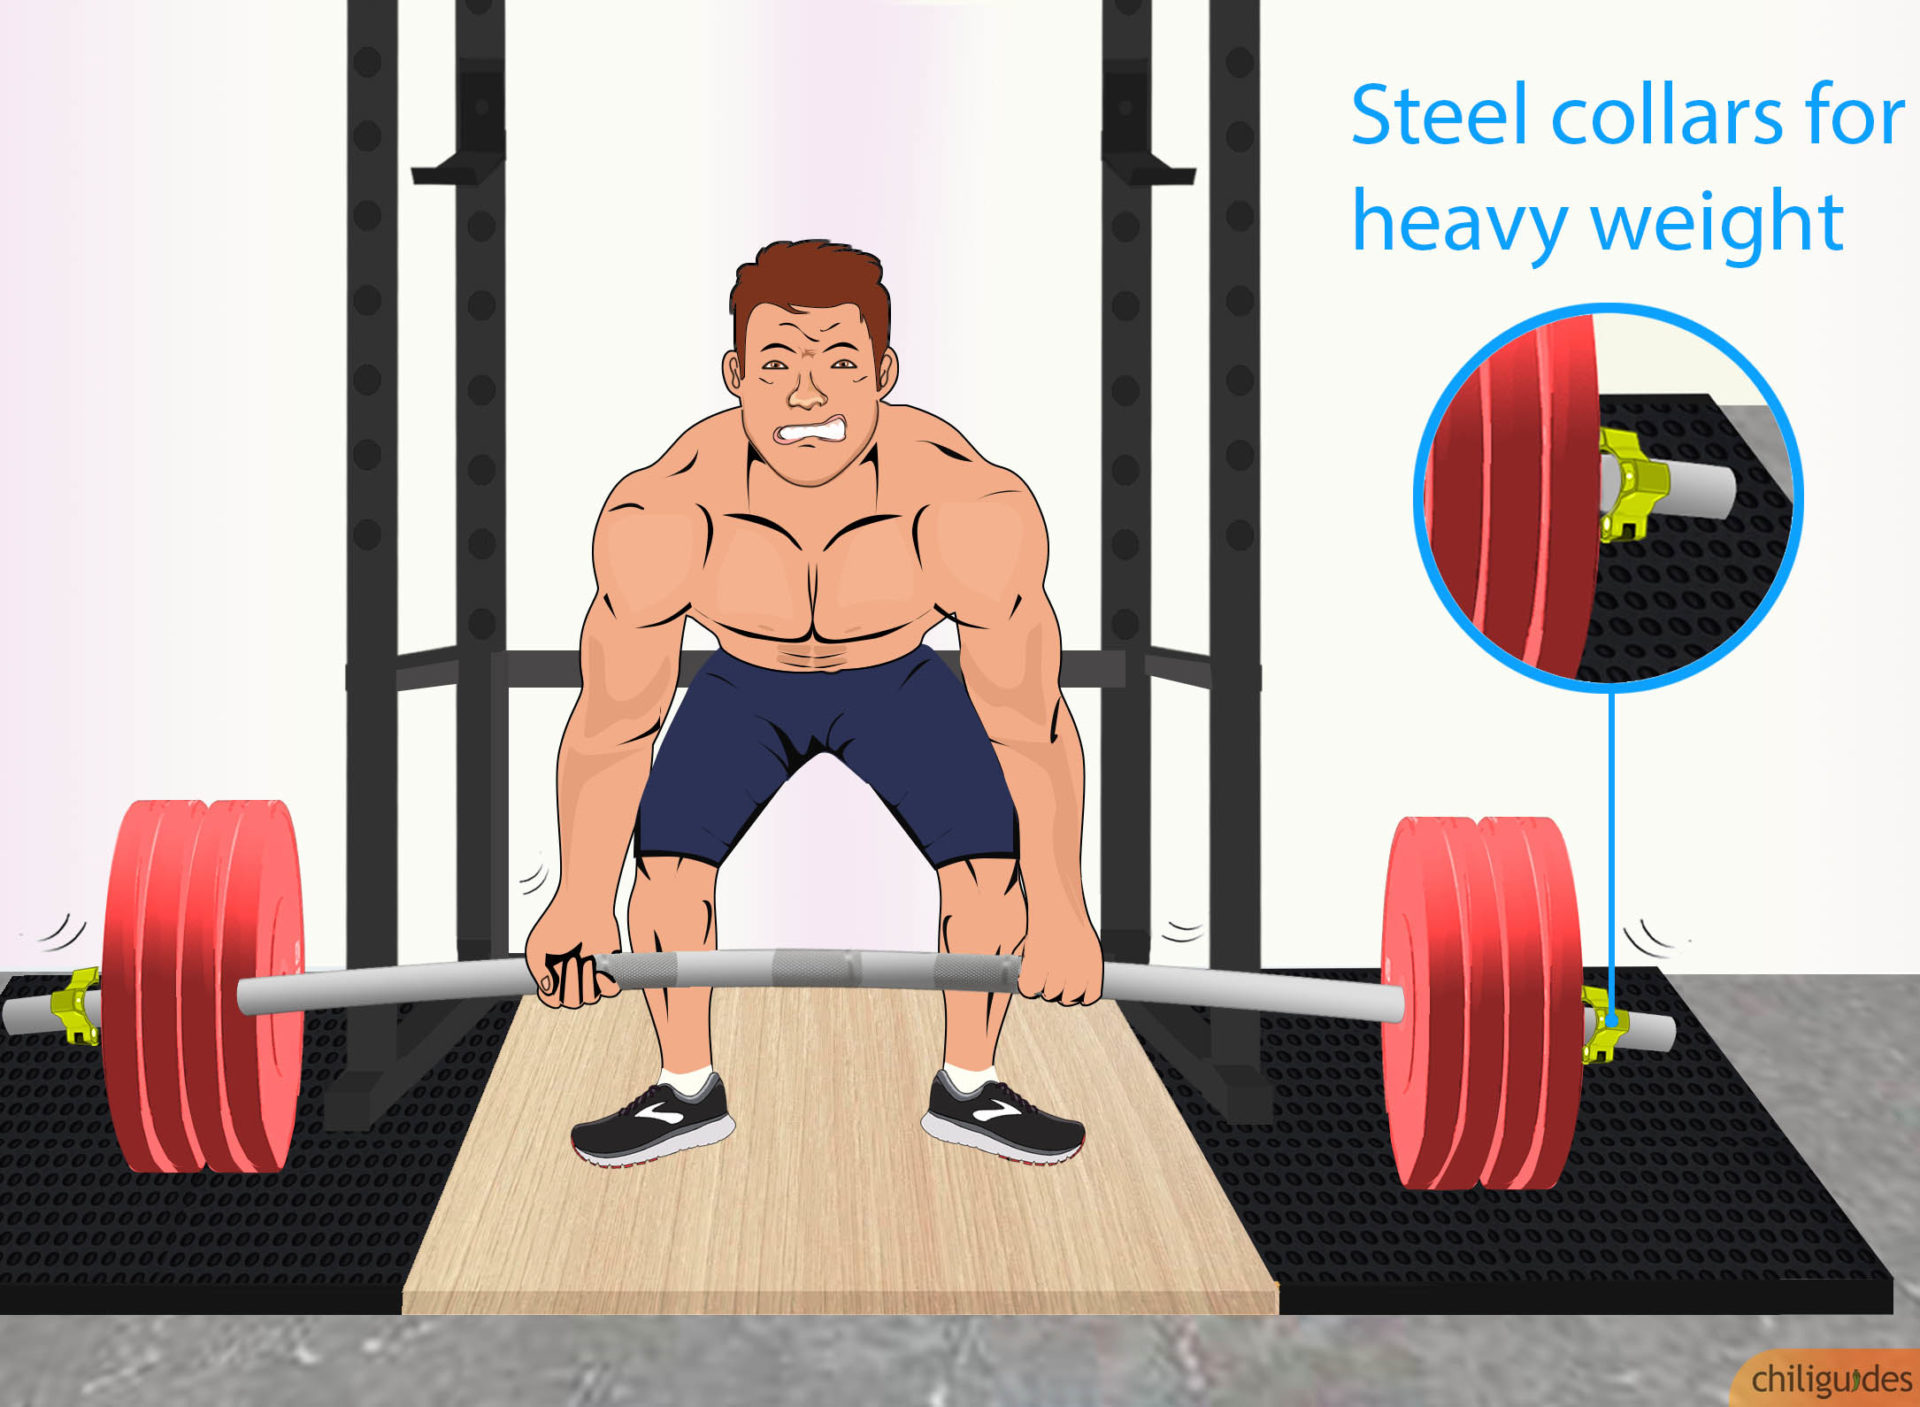 Choose aluminum for weights under 275lbs and steel for anything more.